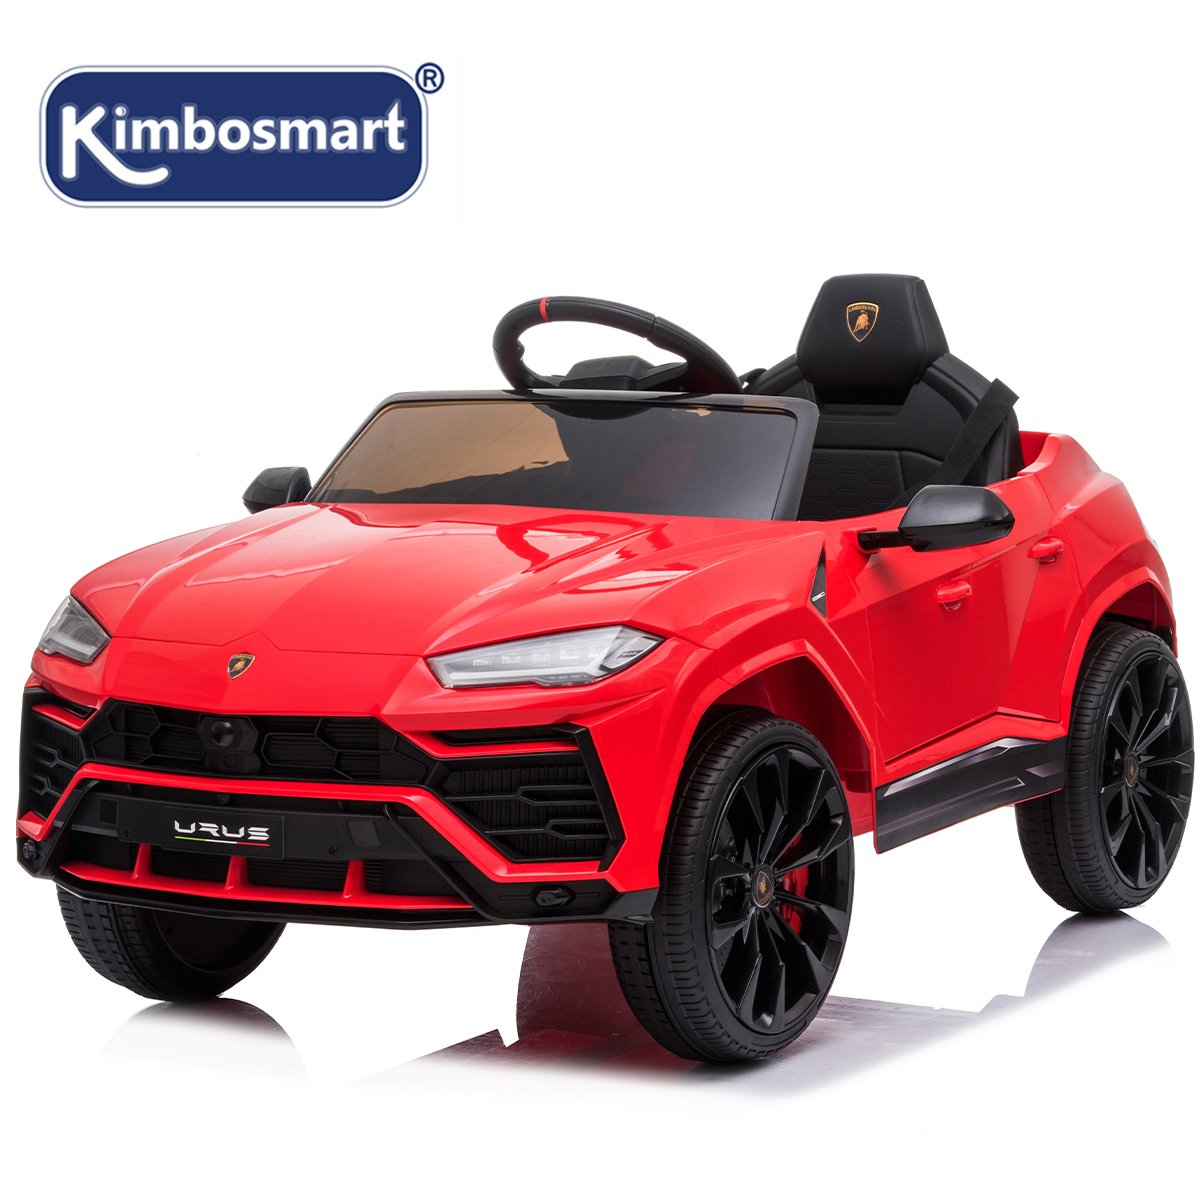 Kimbosmart®Toy Car for Kids Lamborghini Urus Electric Ride on Car with Remote Control 12V Electric 4 Wheels